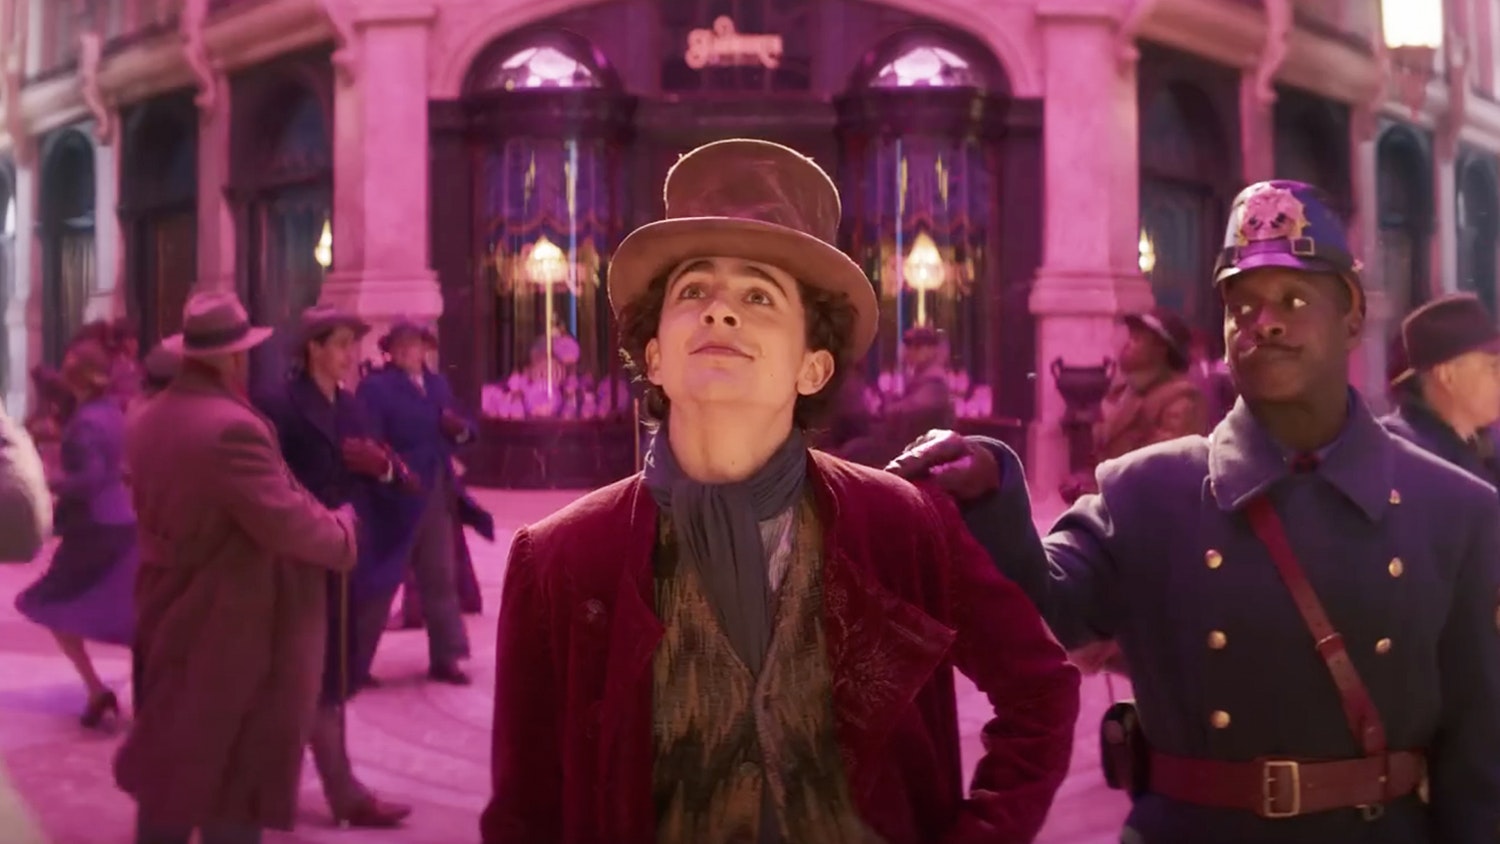 A new Willy Wonka movie could actually work